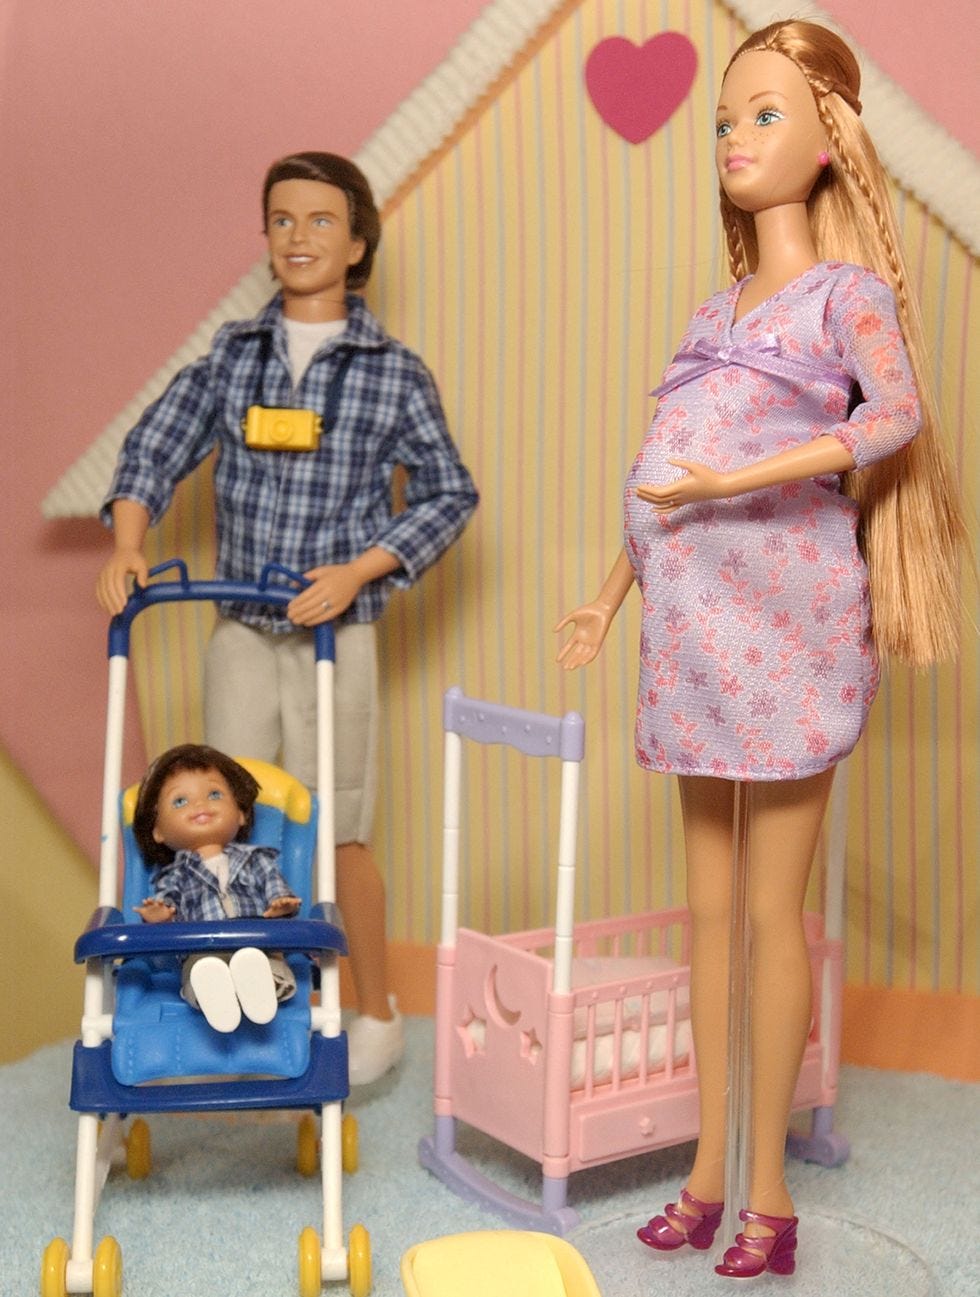 A pregnant Barbie doll stands next to her husband doll who is pushing a child doll in a stroller.